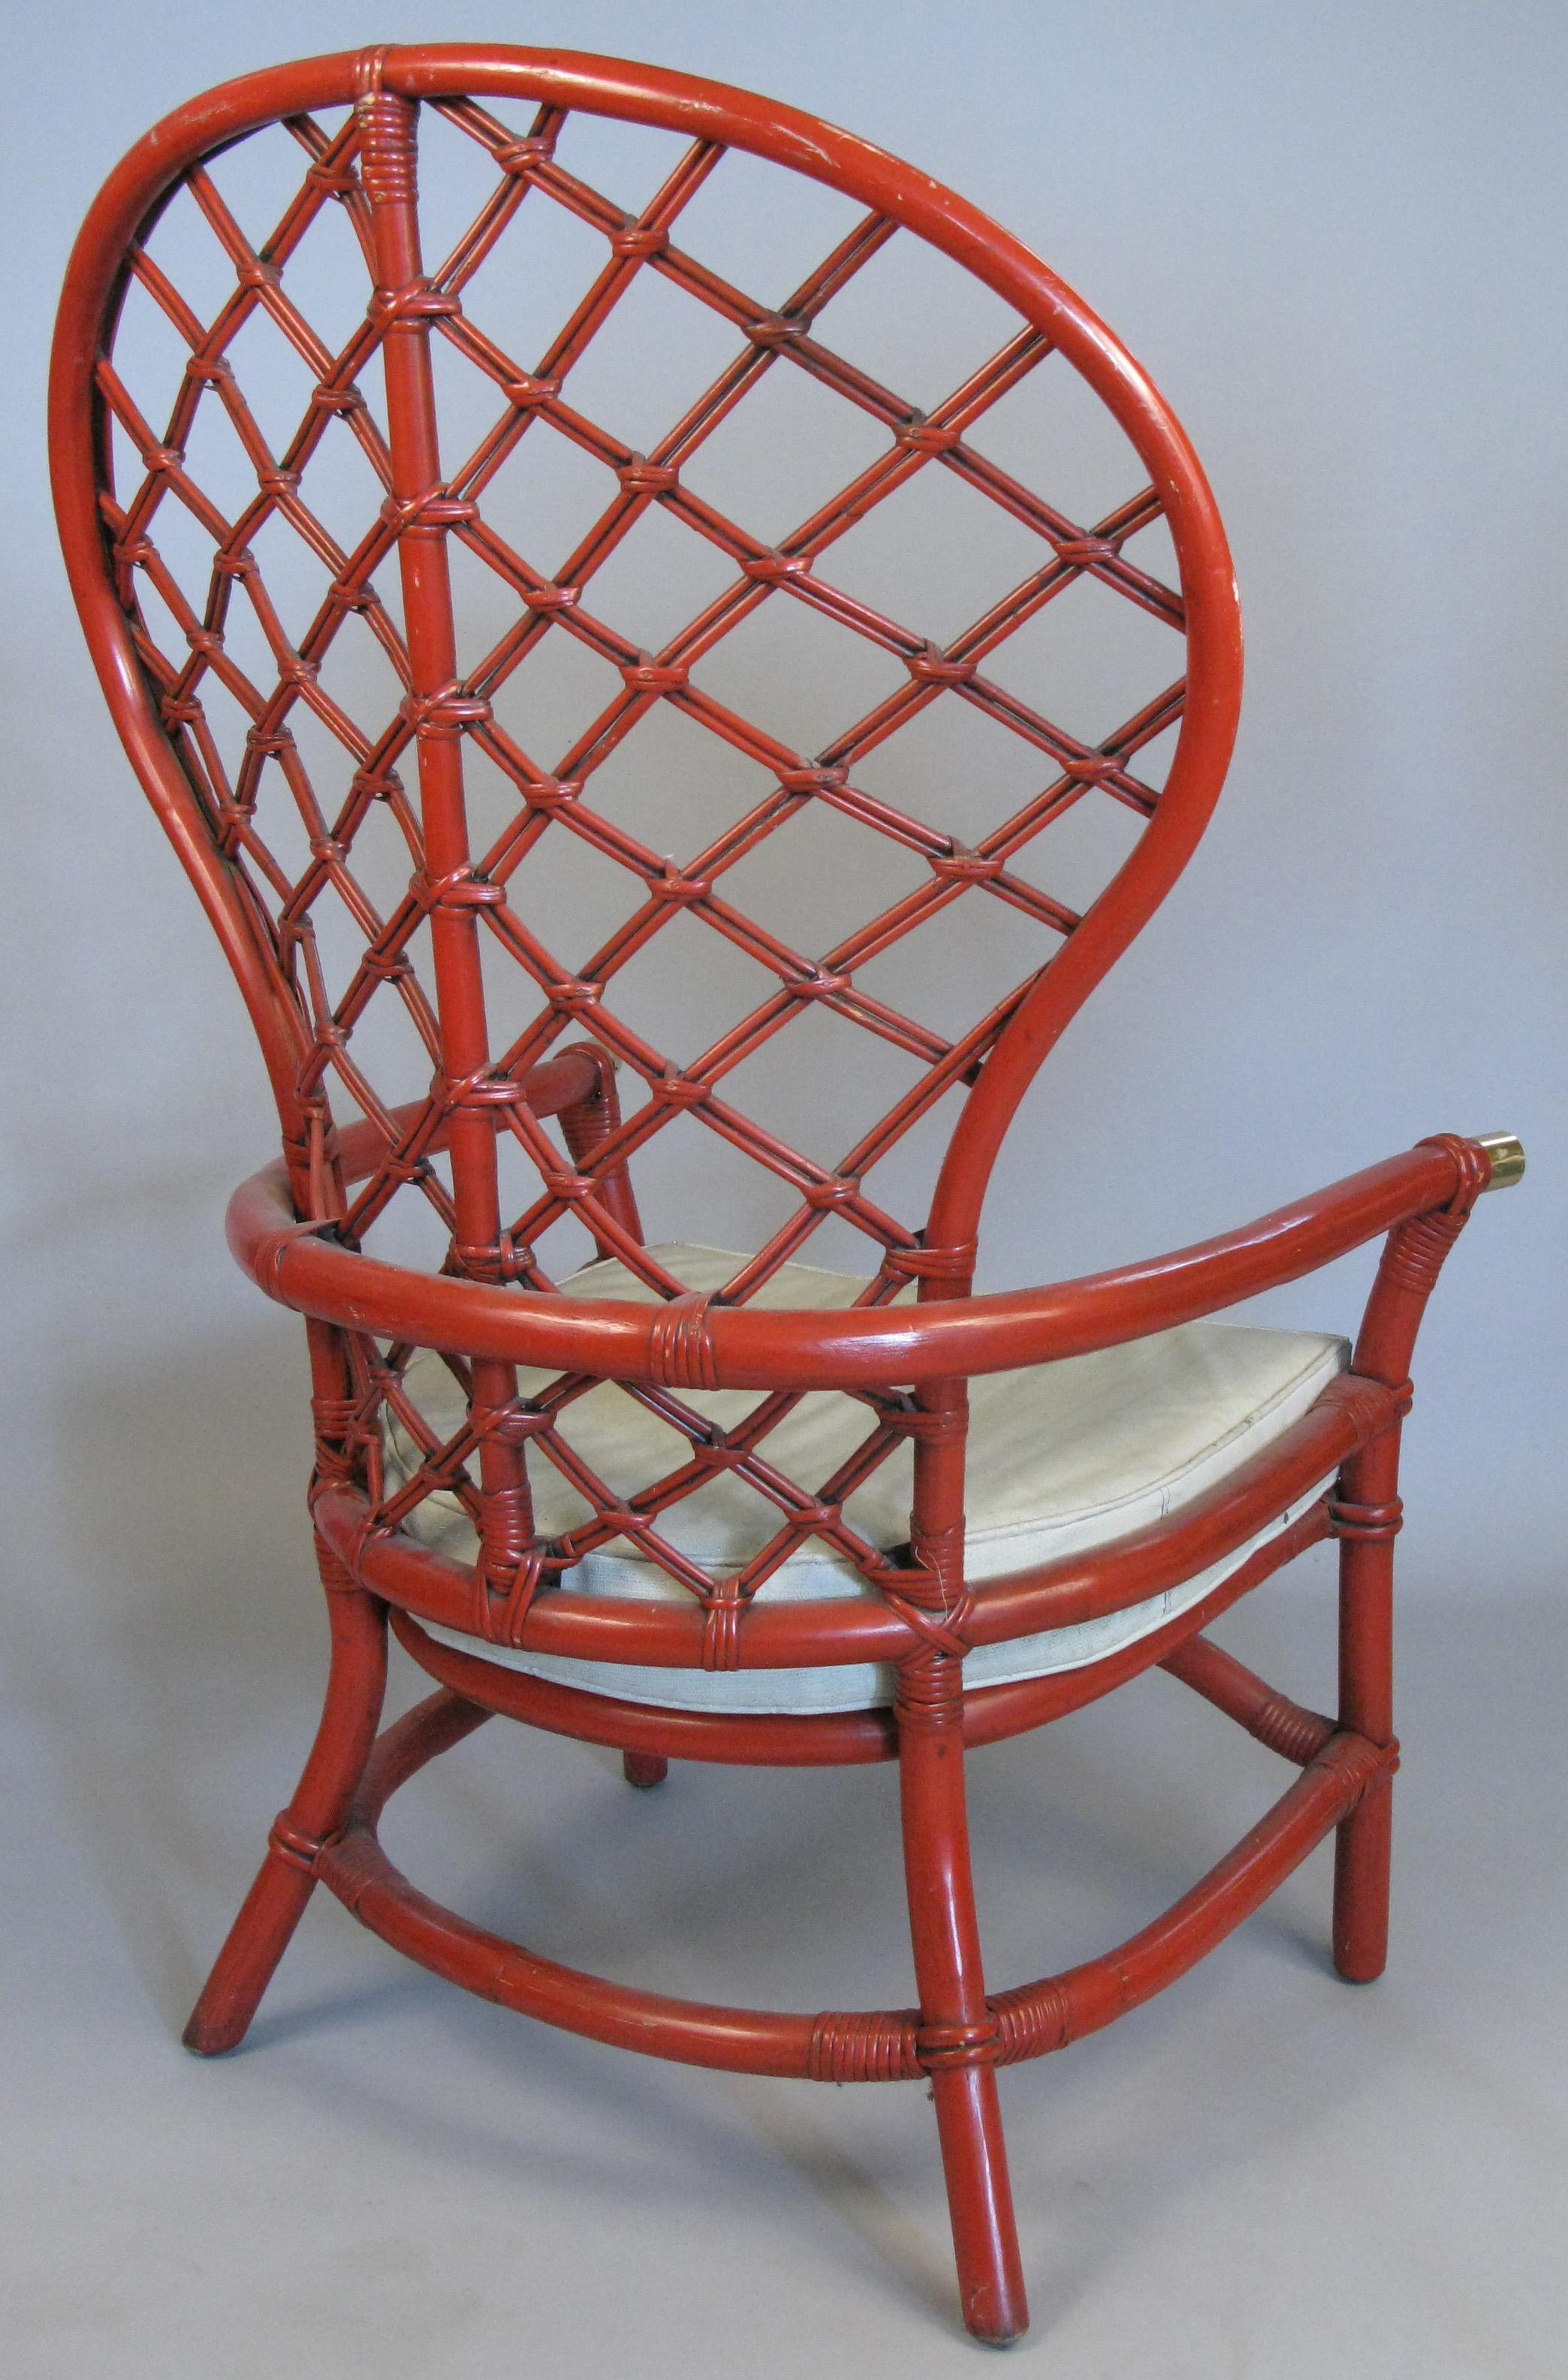 A beautiful pair of vintage 1960s large high back rattan armchairs, with woven lattice design back and brass caps on the armrests. In their original Pompeii red painted finish and vinyl upholstered seat cushions. Great scale and proportions.